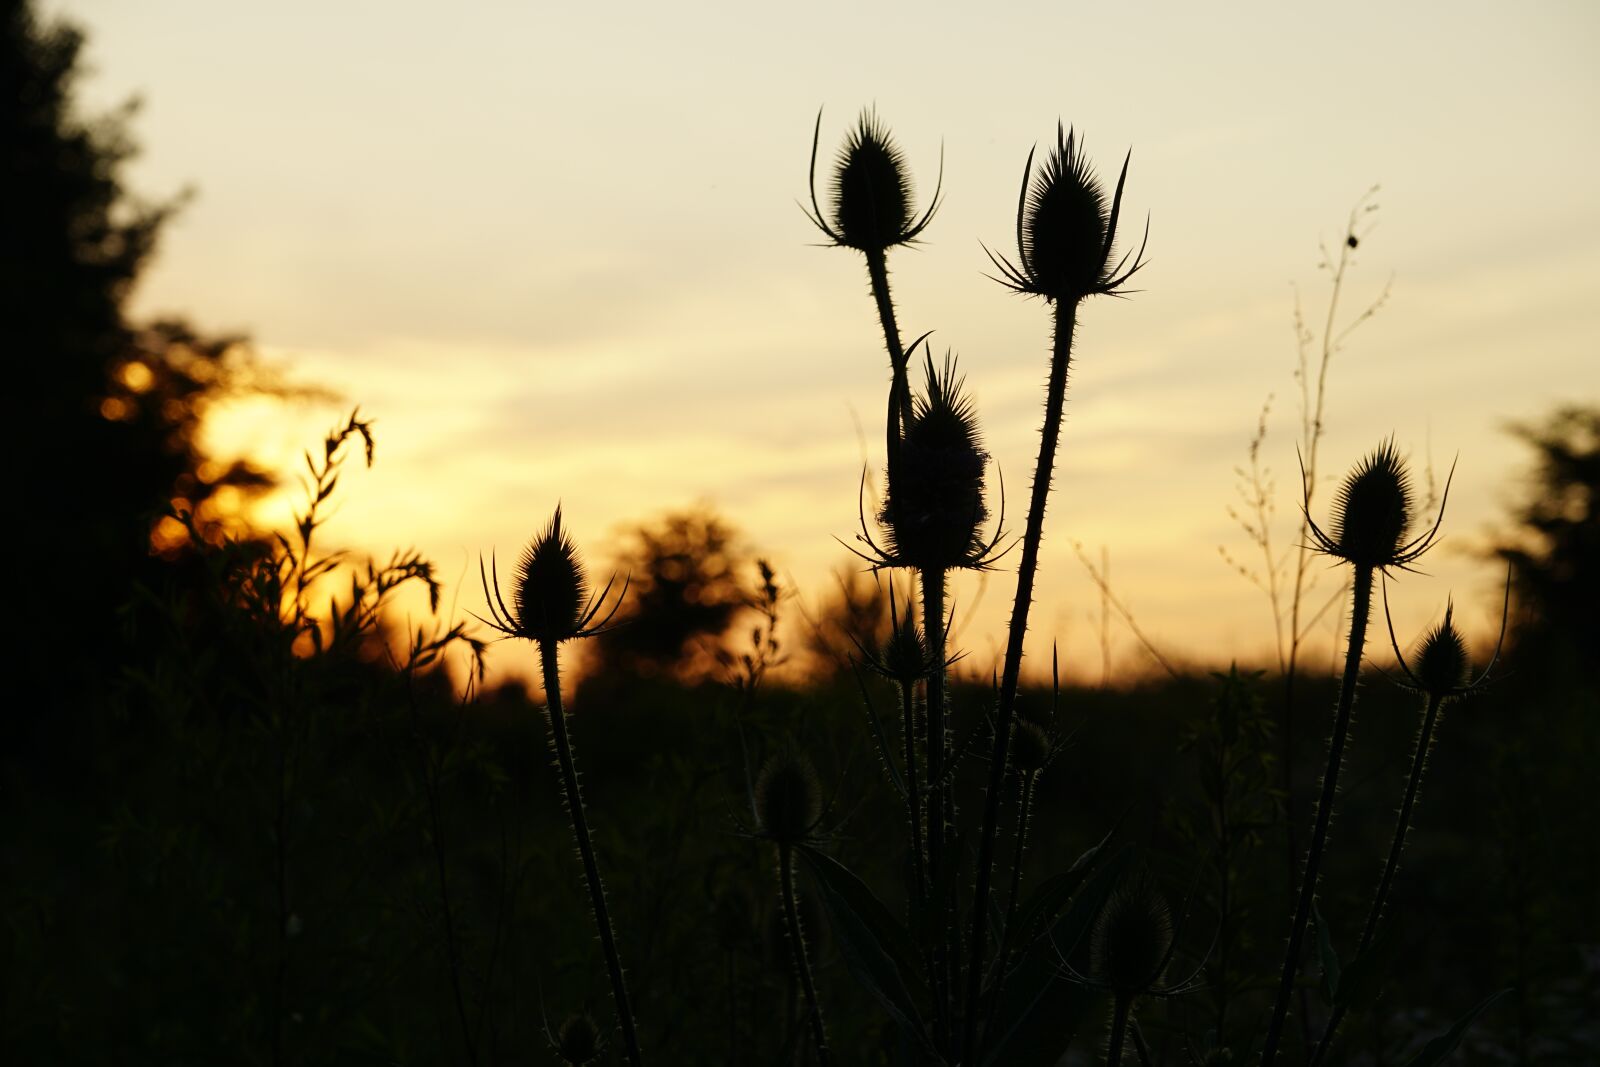 Sony a6300 sample photo. Sunset, thistle, silhouette photography